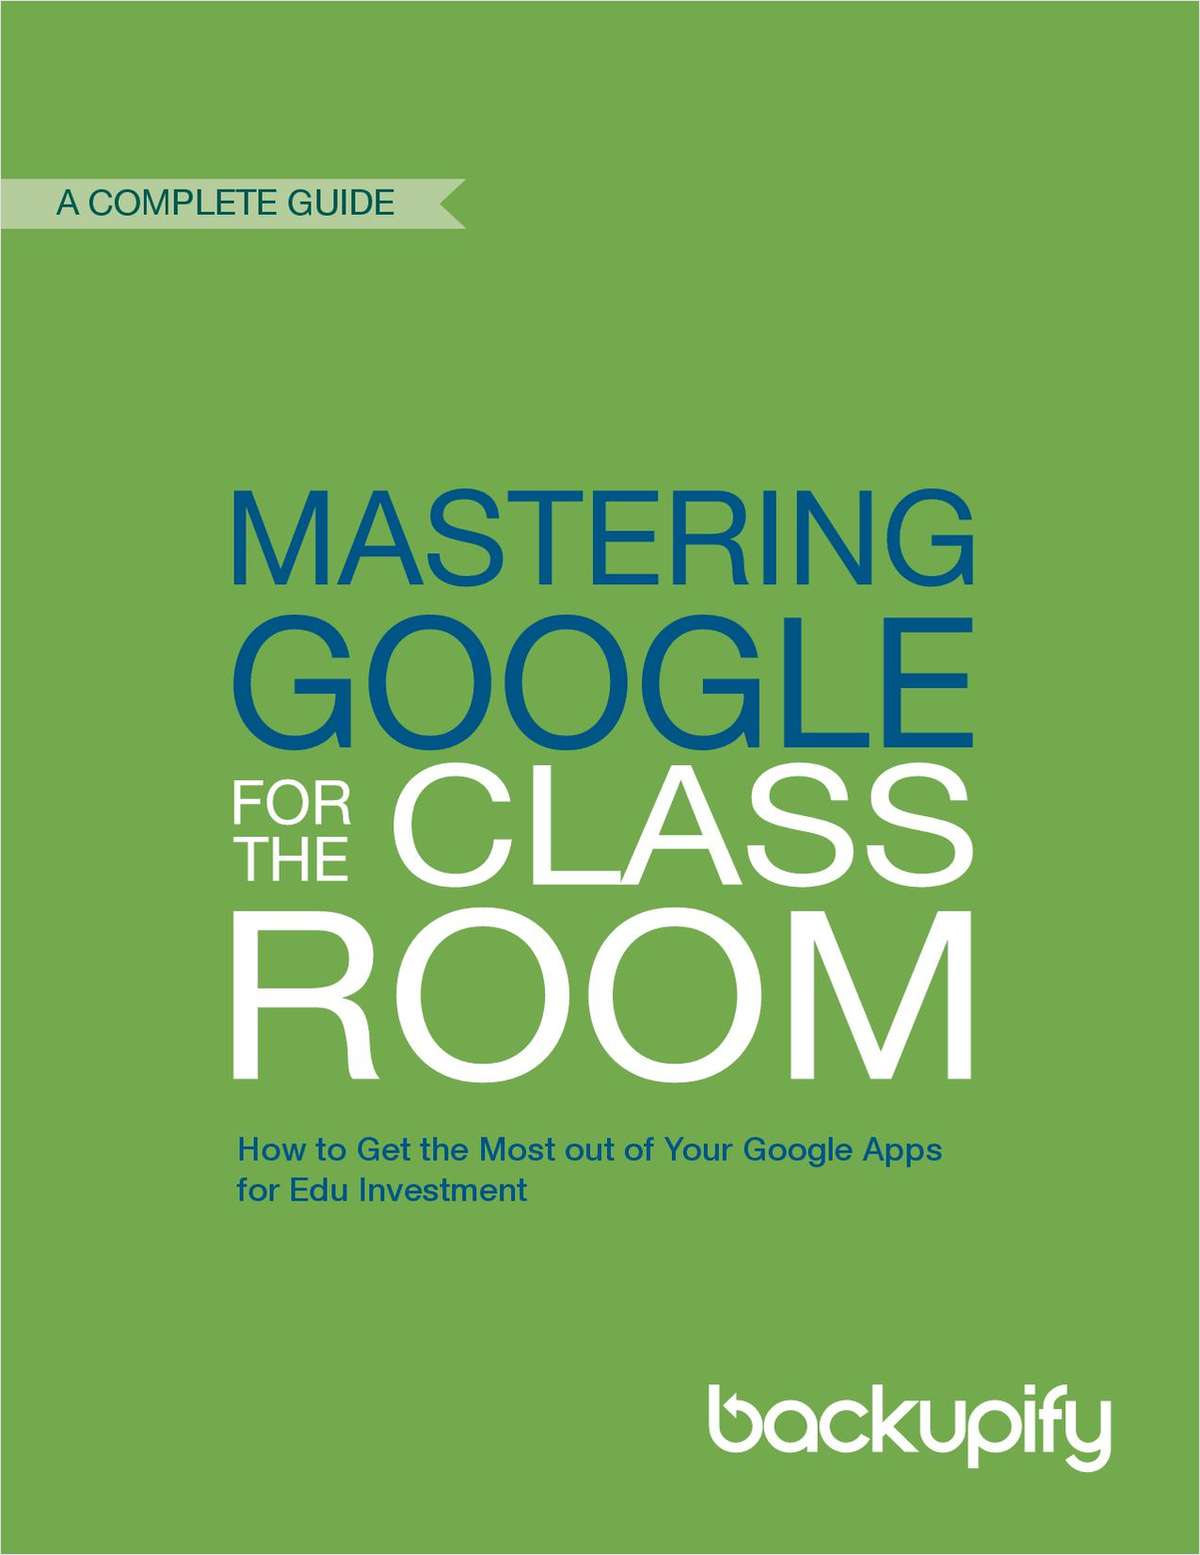 Mastering Google Apps in the Classroom